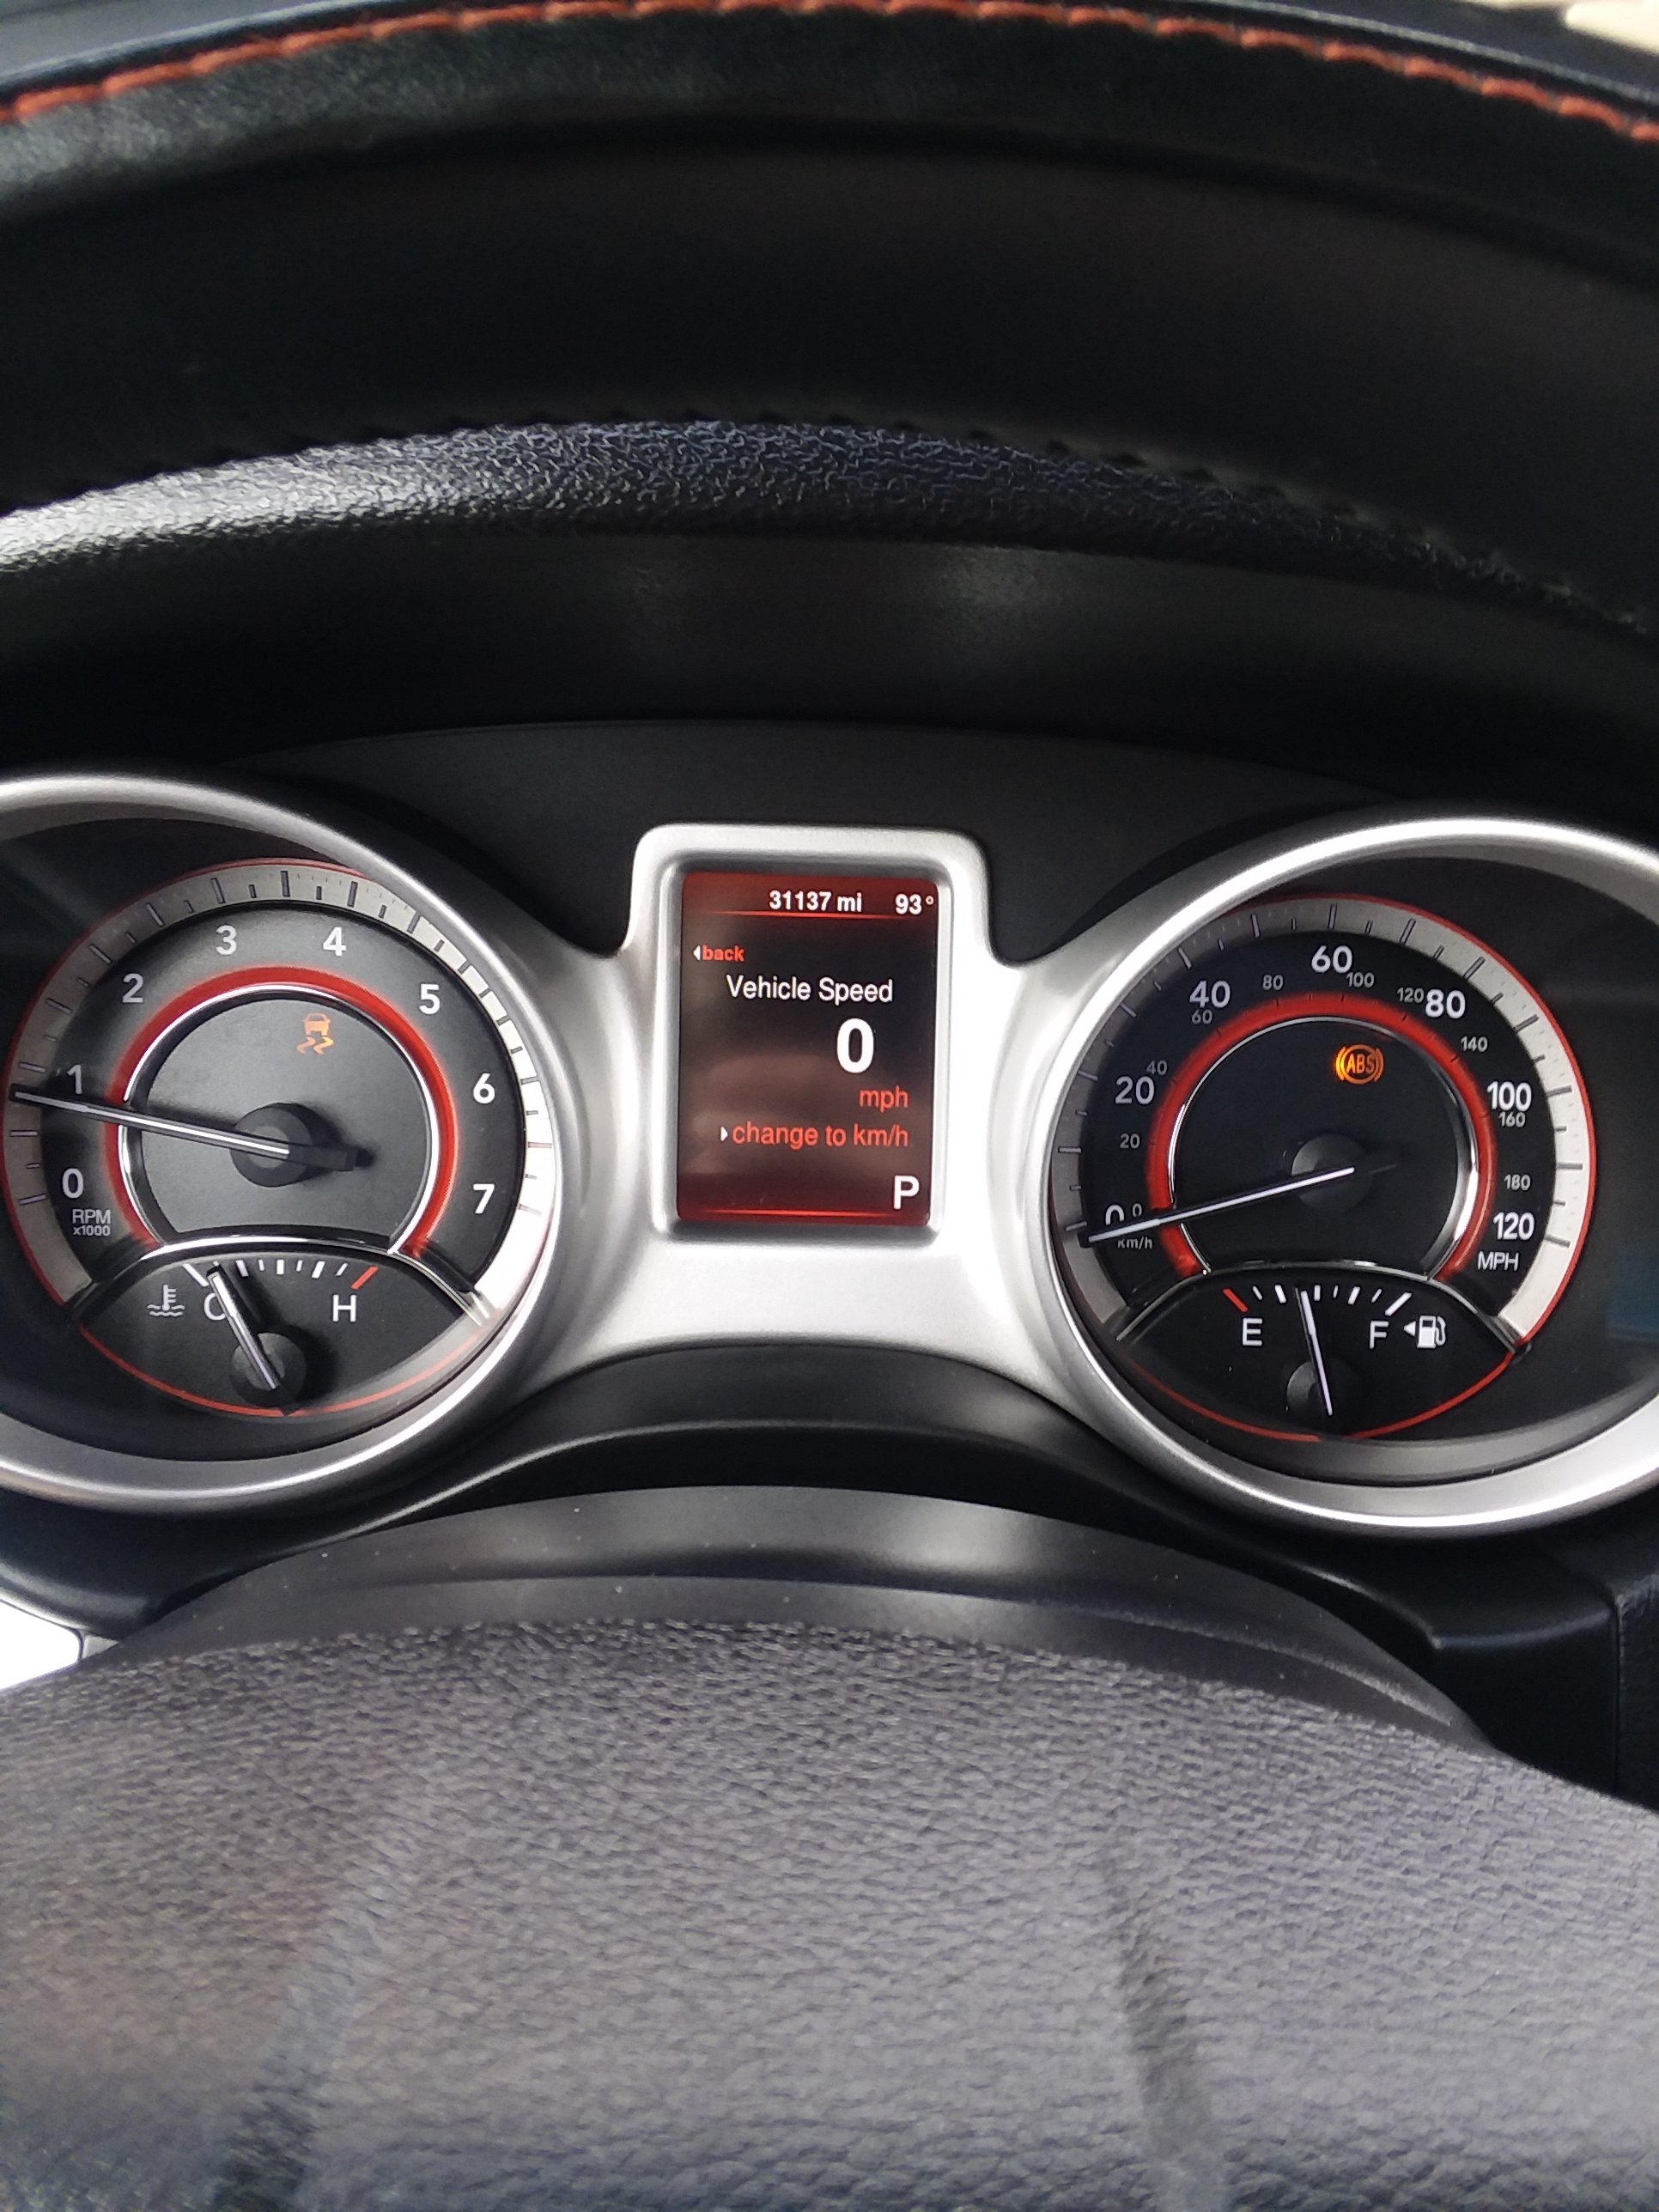 dodge journey service awd and abs light